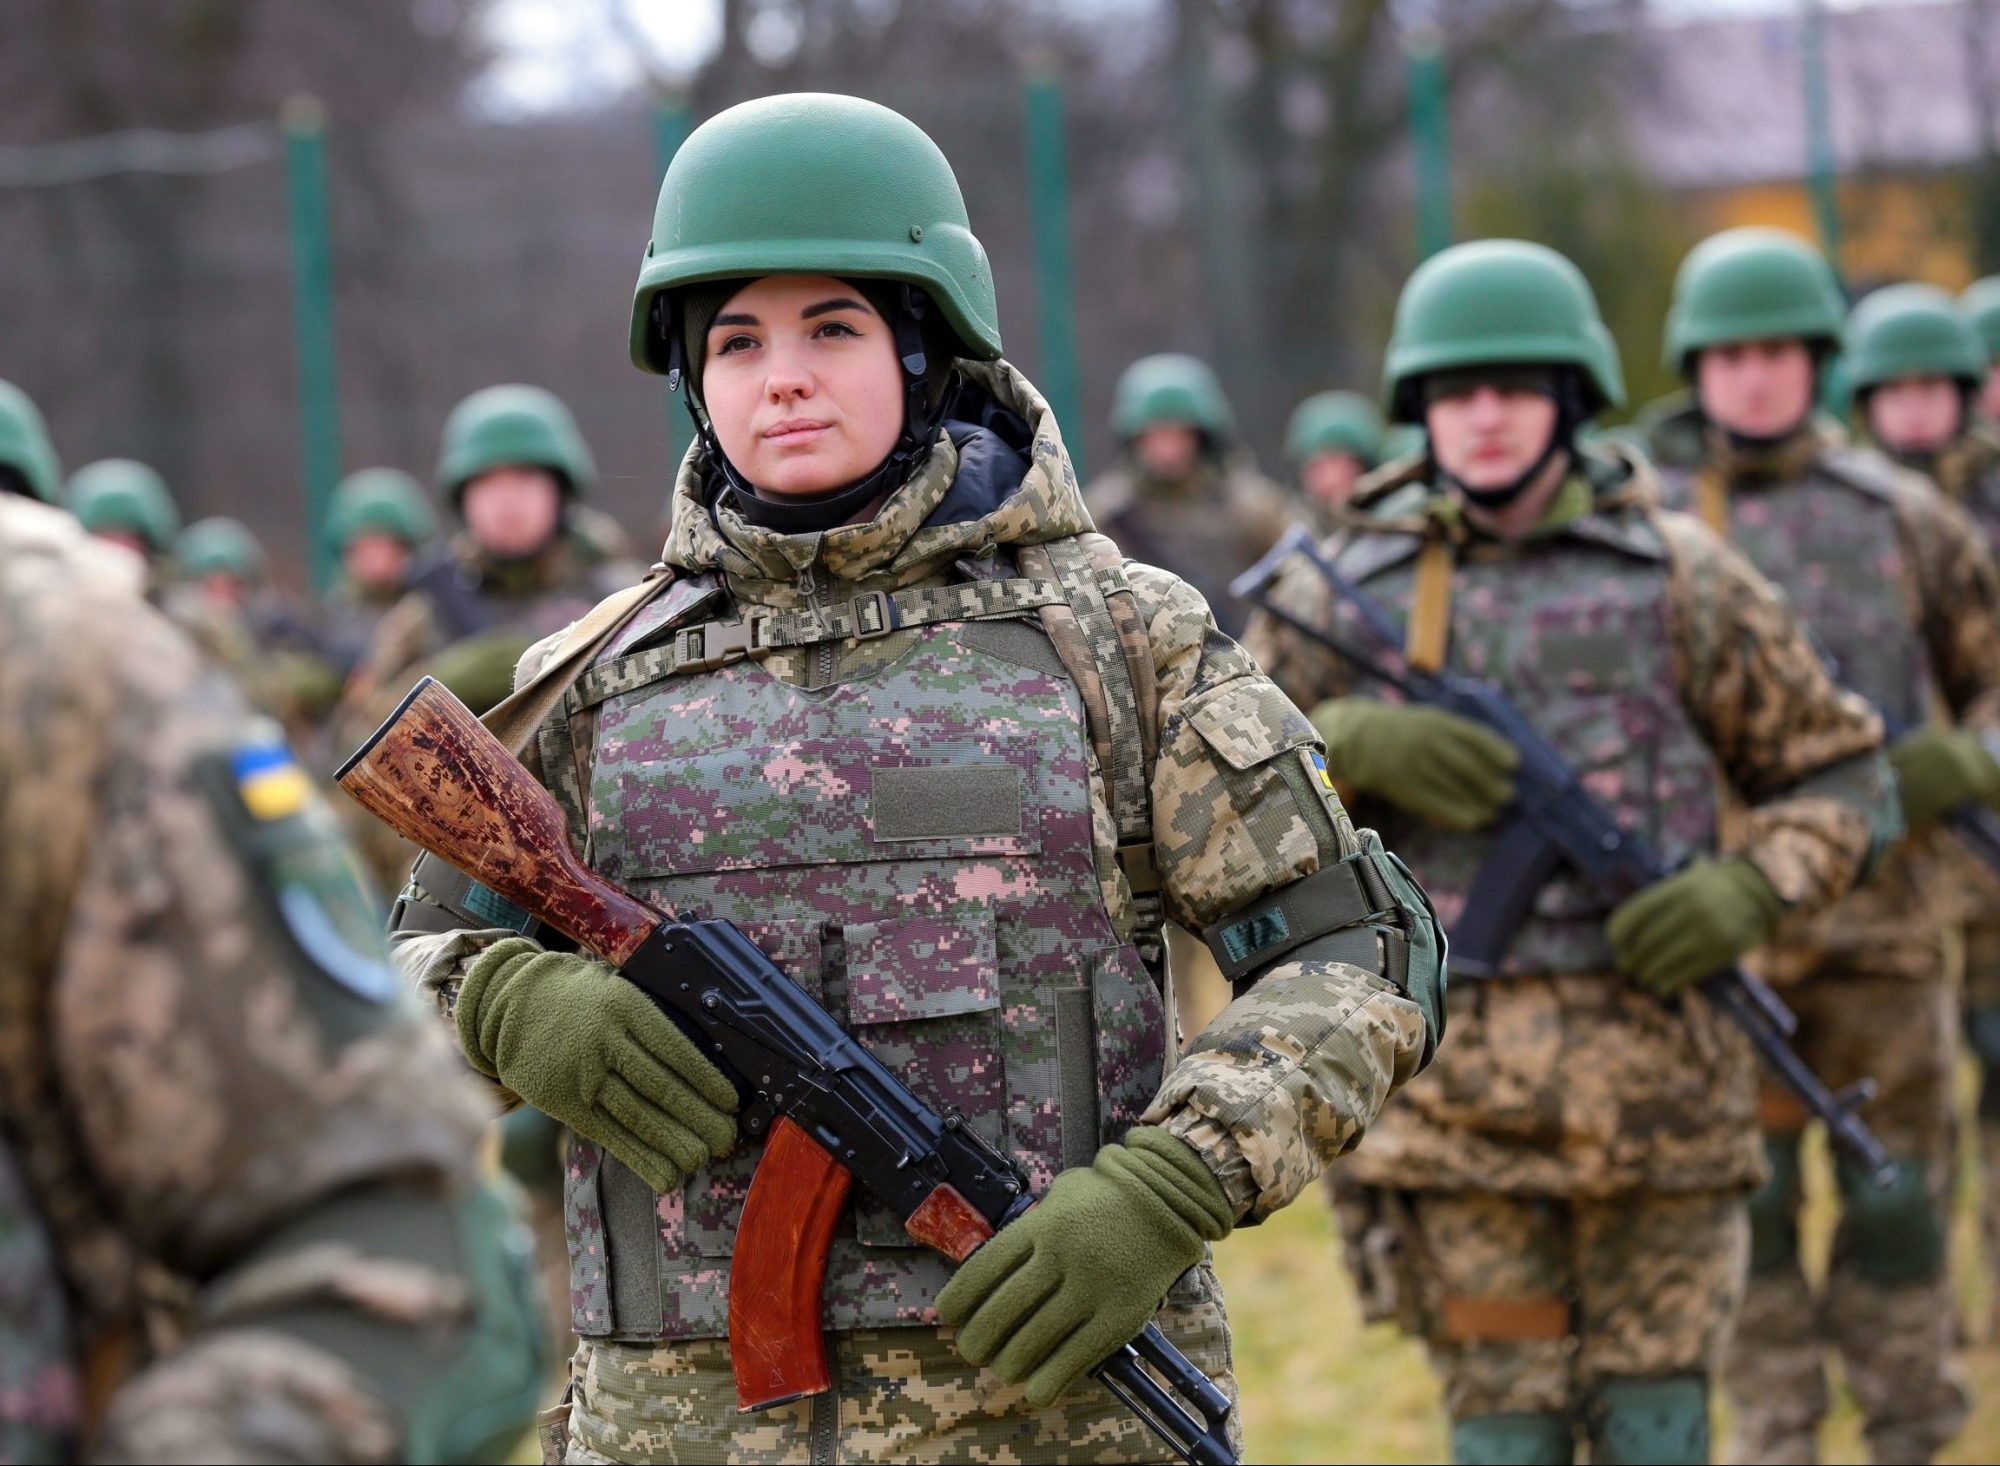 Ukraines women are playing a key role in the fight against Russia photo pic pic